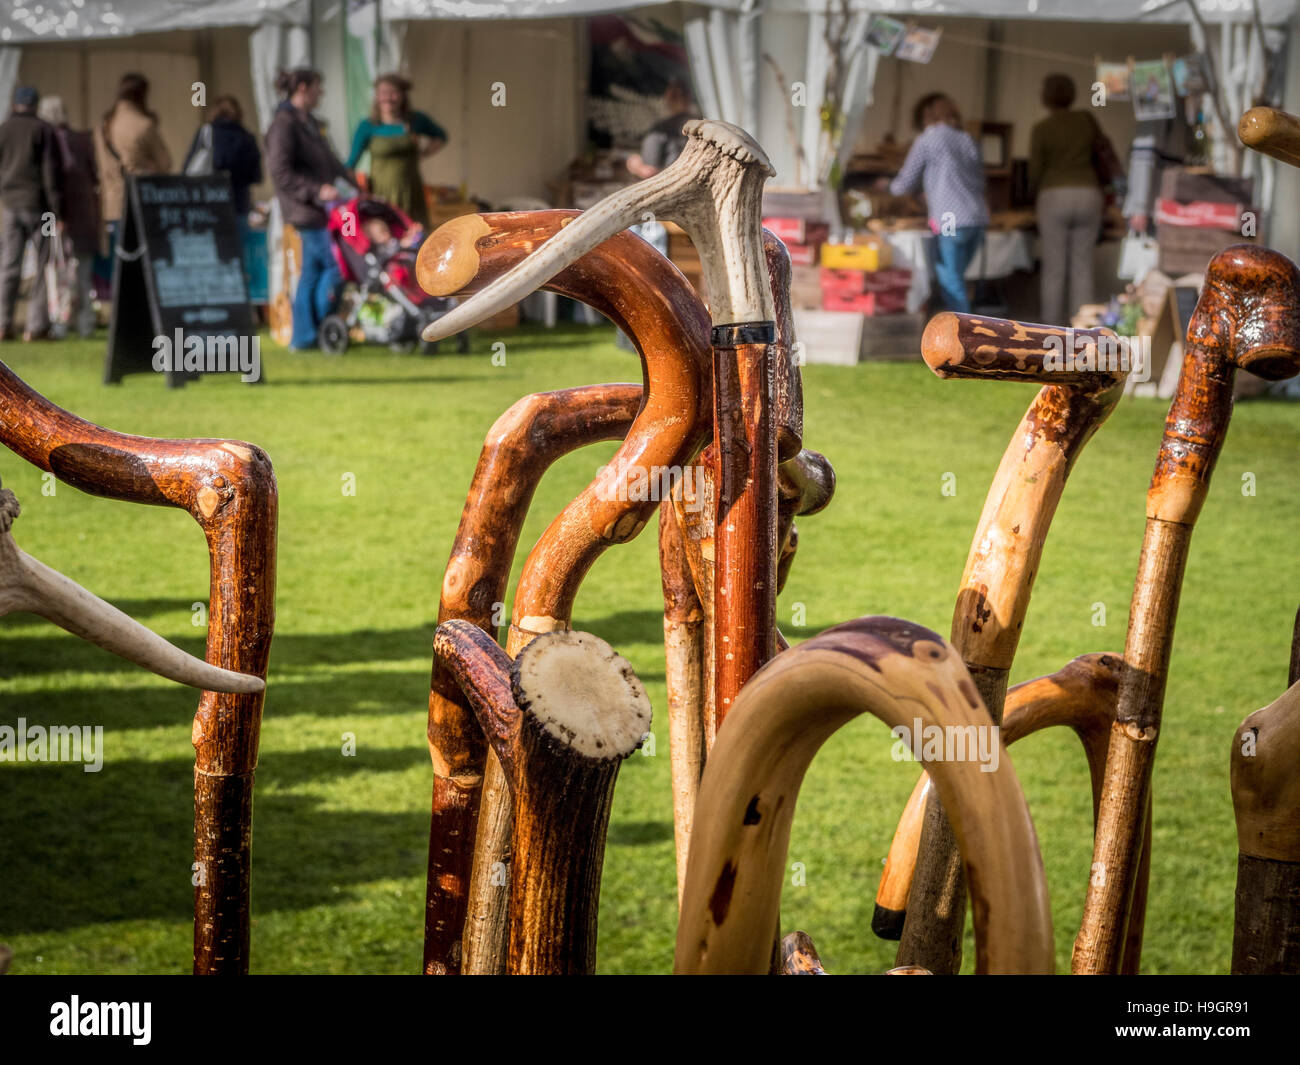 Hand crafted walking sticks for sale at country show Stock Photo